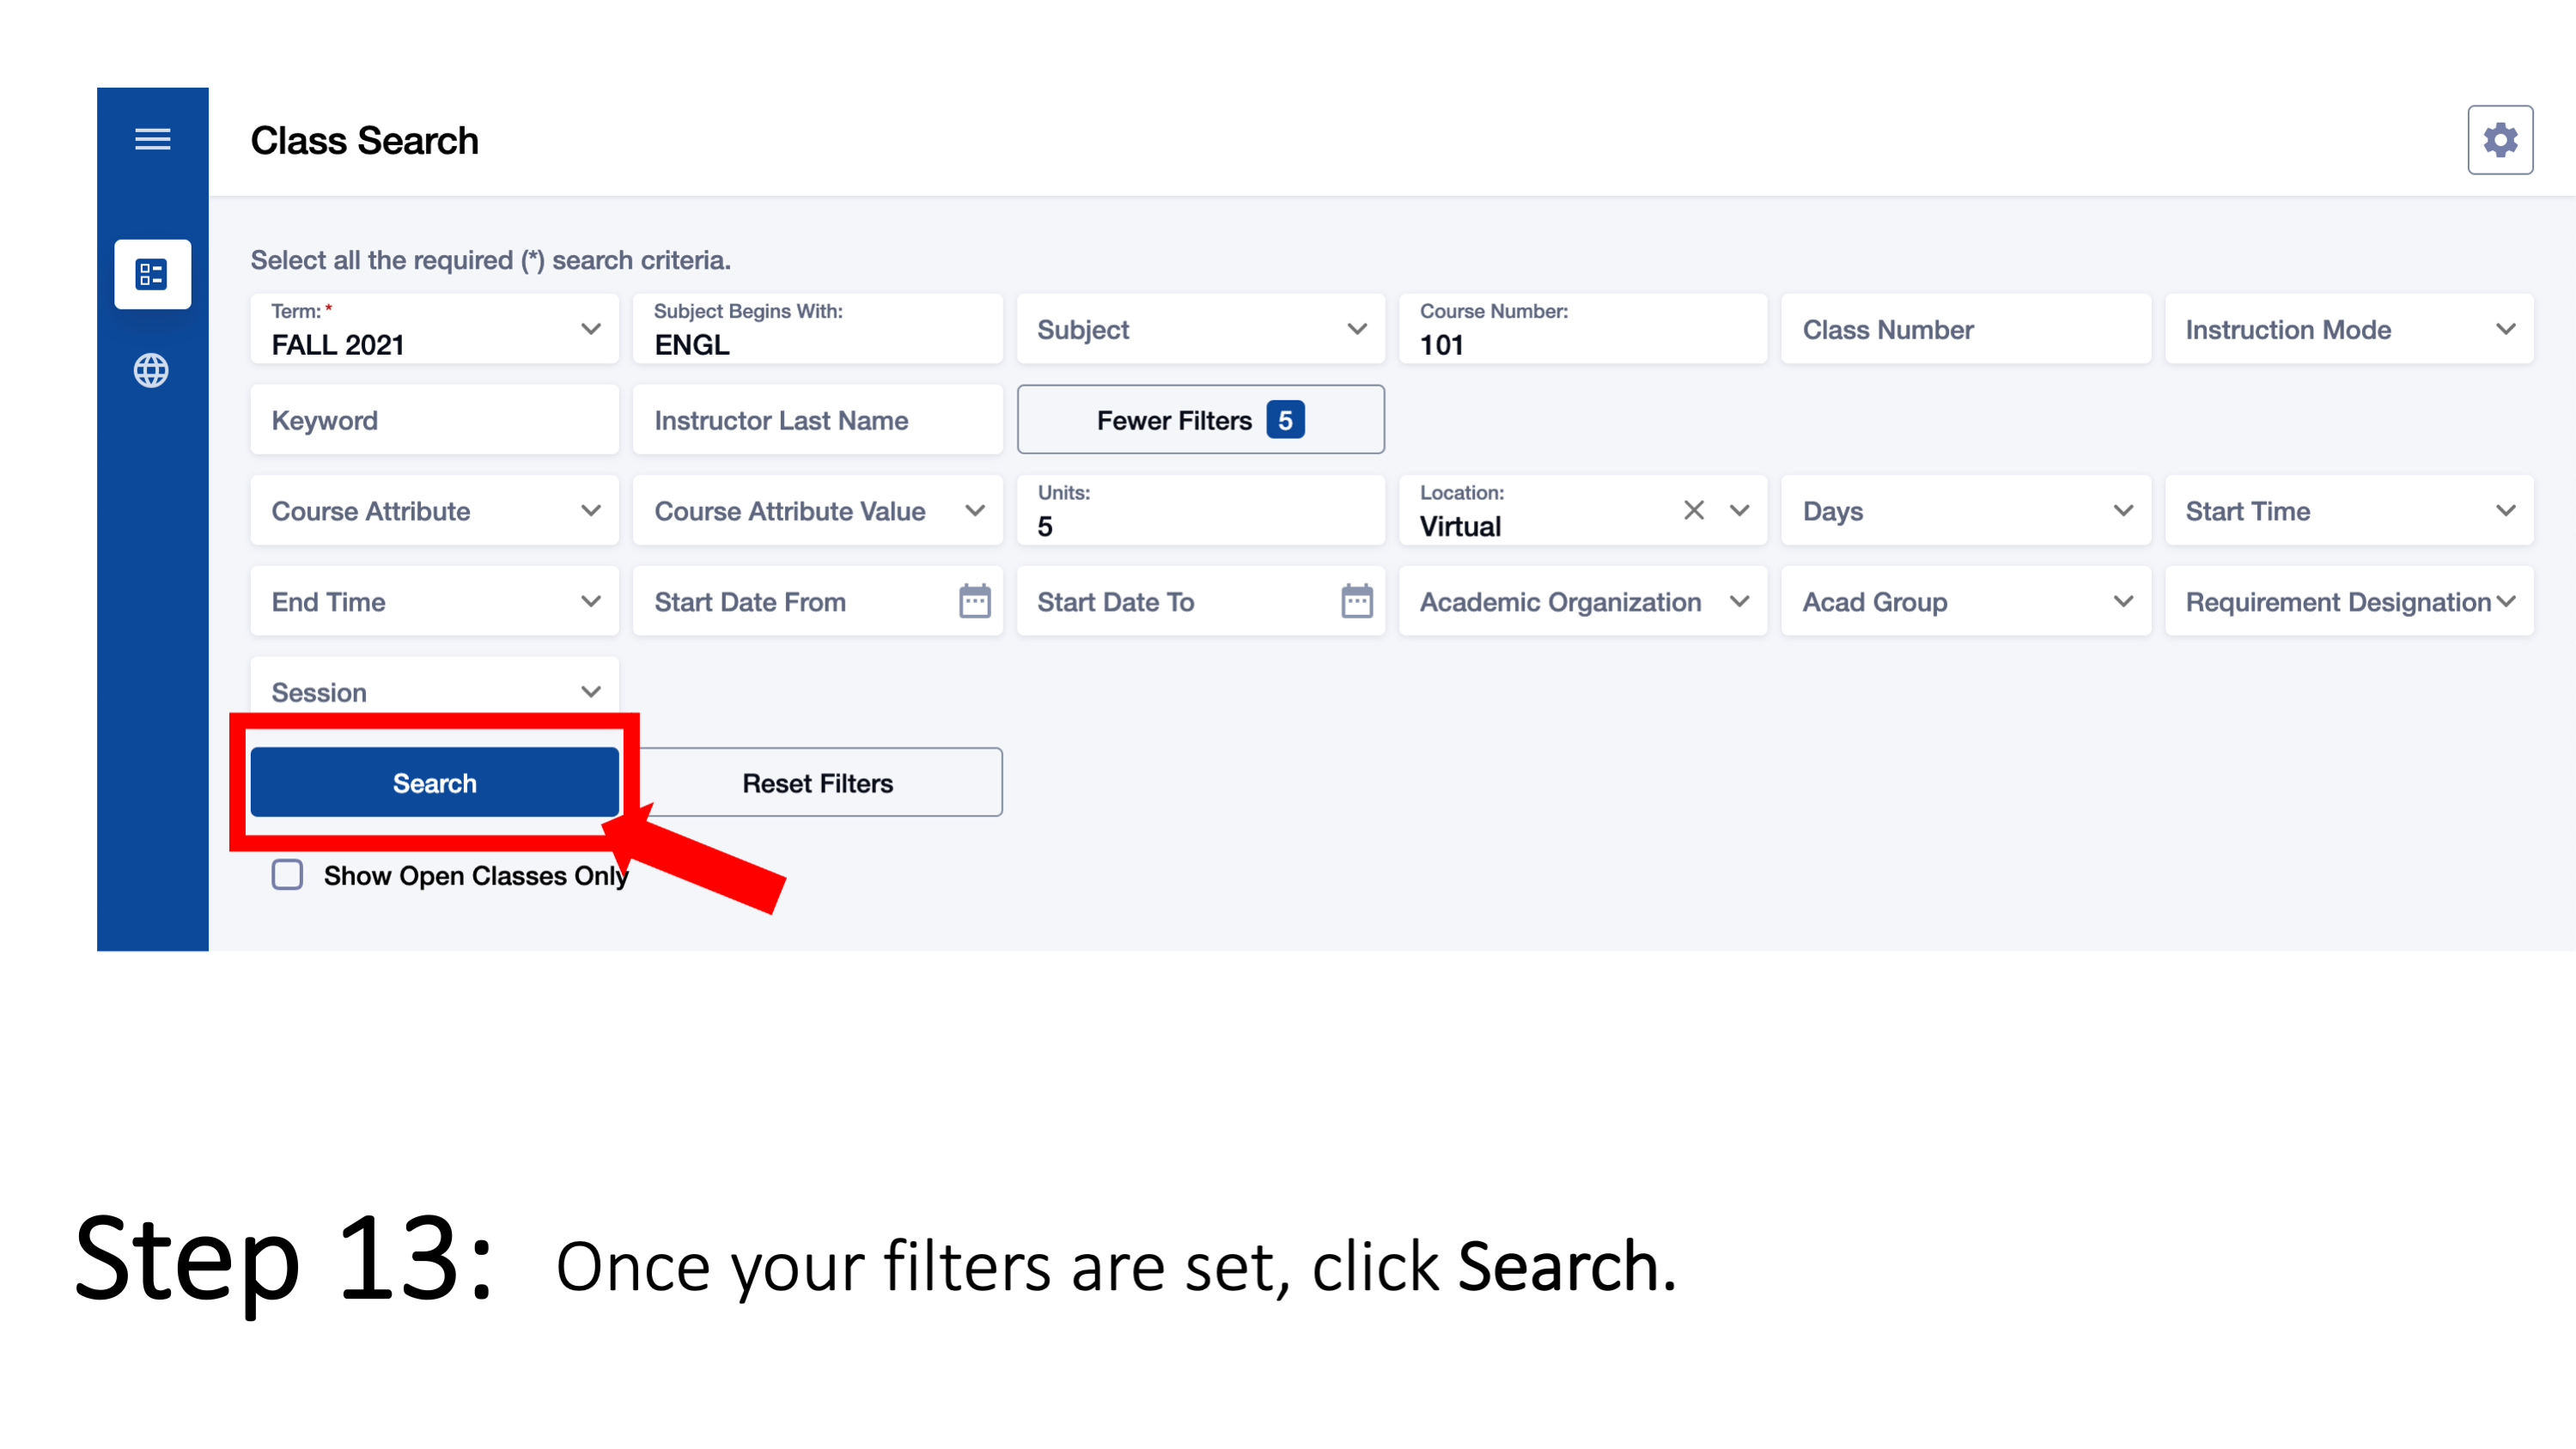 Step 13: Once your filters are set, click Search.